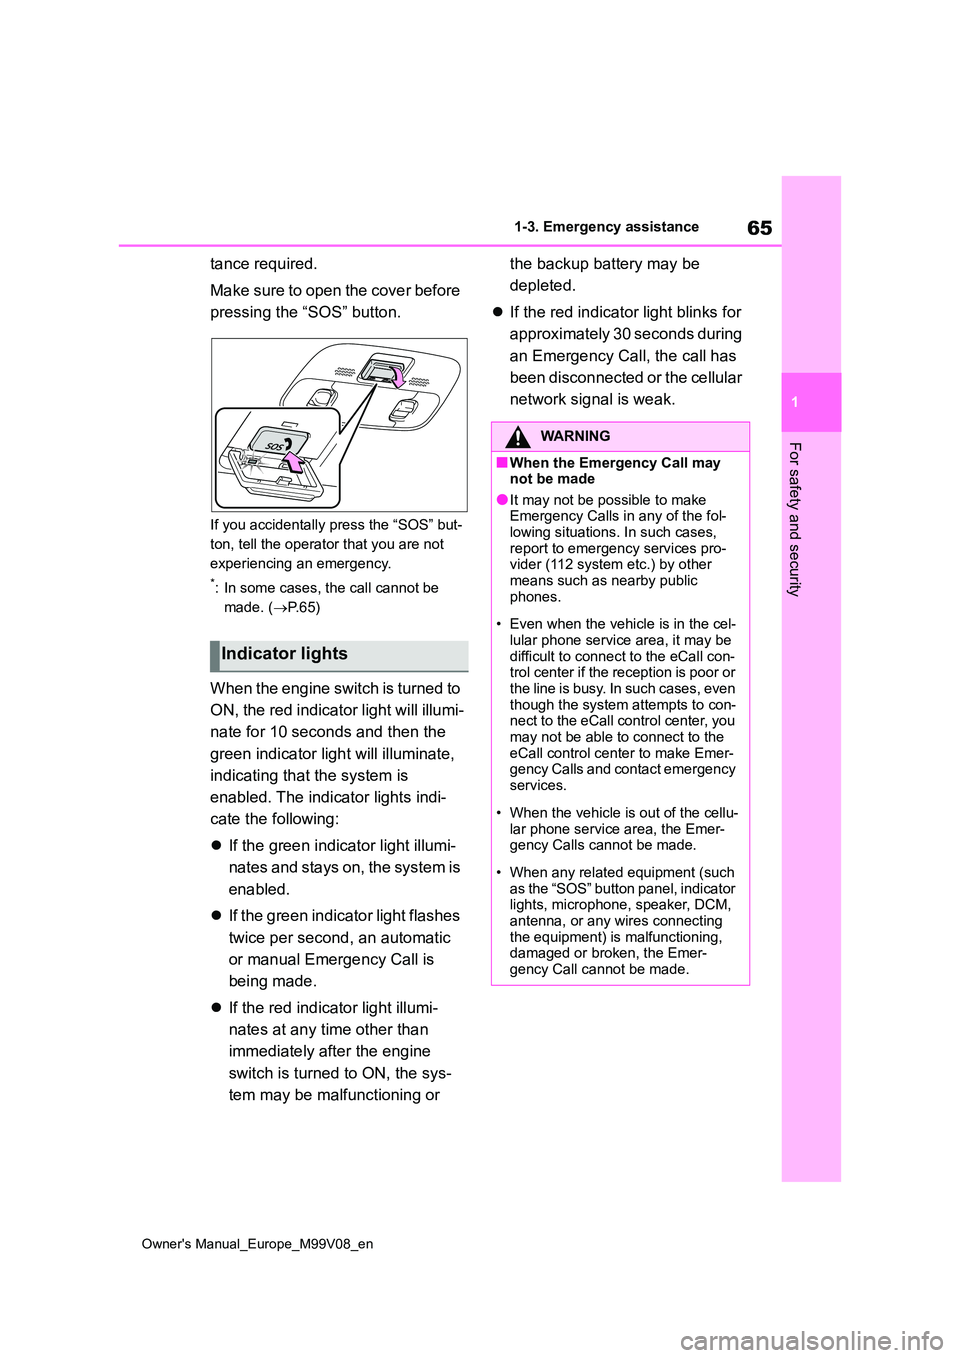 TOYOTA AYGO X 2022  Owners Manual (in English) 65
1
Owner's Manual_Europe_M99V08_en
1-3. Emergency assistance
For safety and security
tance required. 
Make sure to open the cover before  
pressing the “SOS” button.
If you accidentally pres